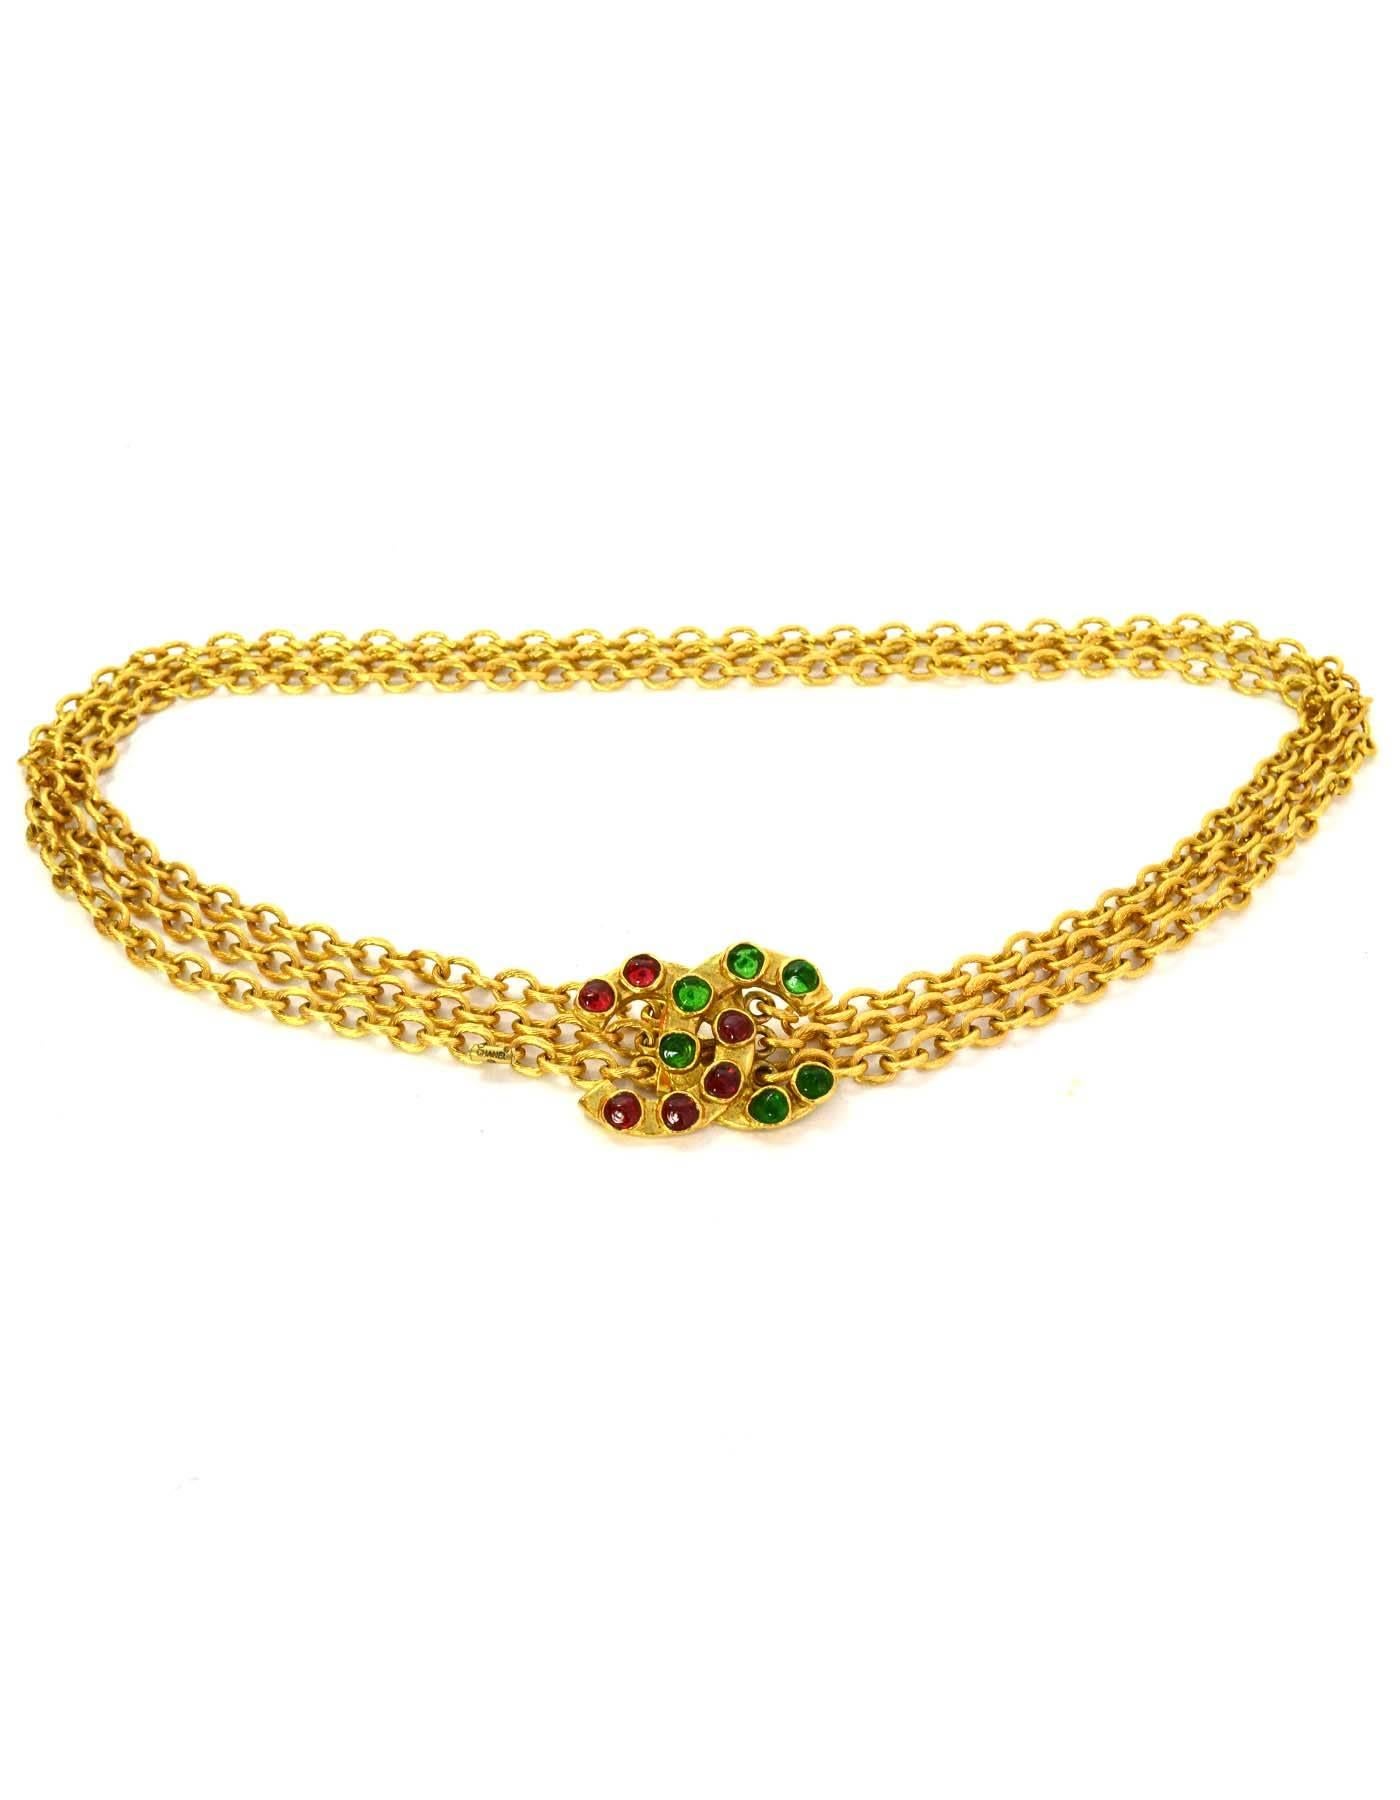 Chanel Vintage ''80s Gripoix & Gold Multi-Strand Belt/Necklace
Features three strands of goldtone chain link metal with green and red gripoix glass CC buckle
Year of Production:1980's
Color: Goldtone, red and green
Materials: Metal and poured